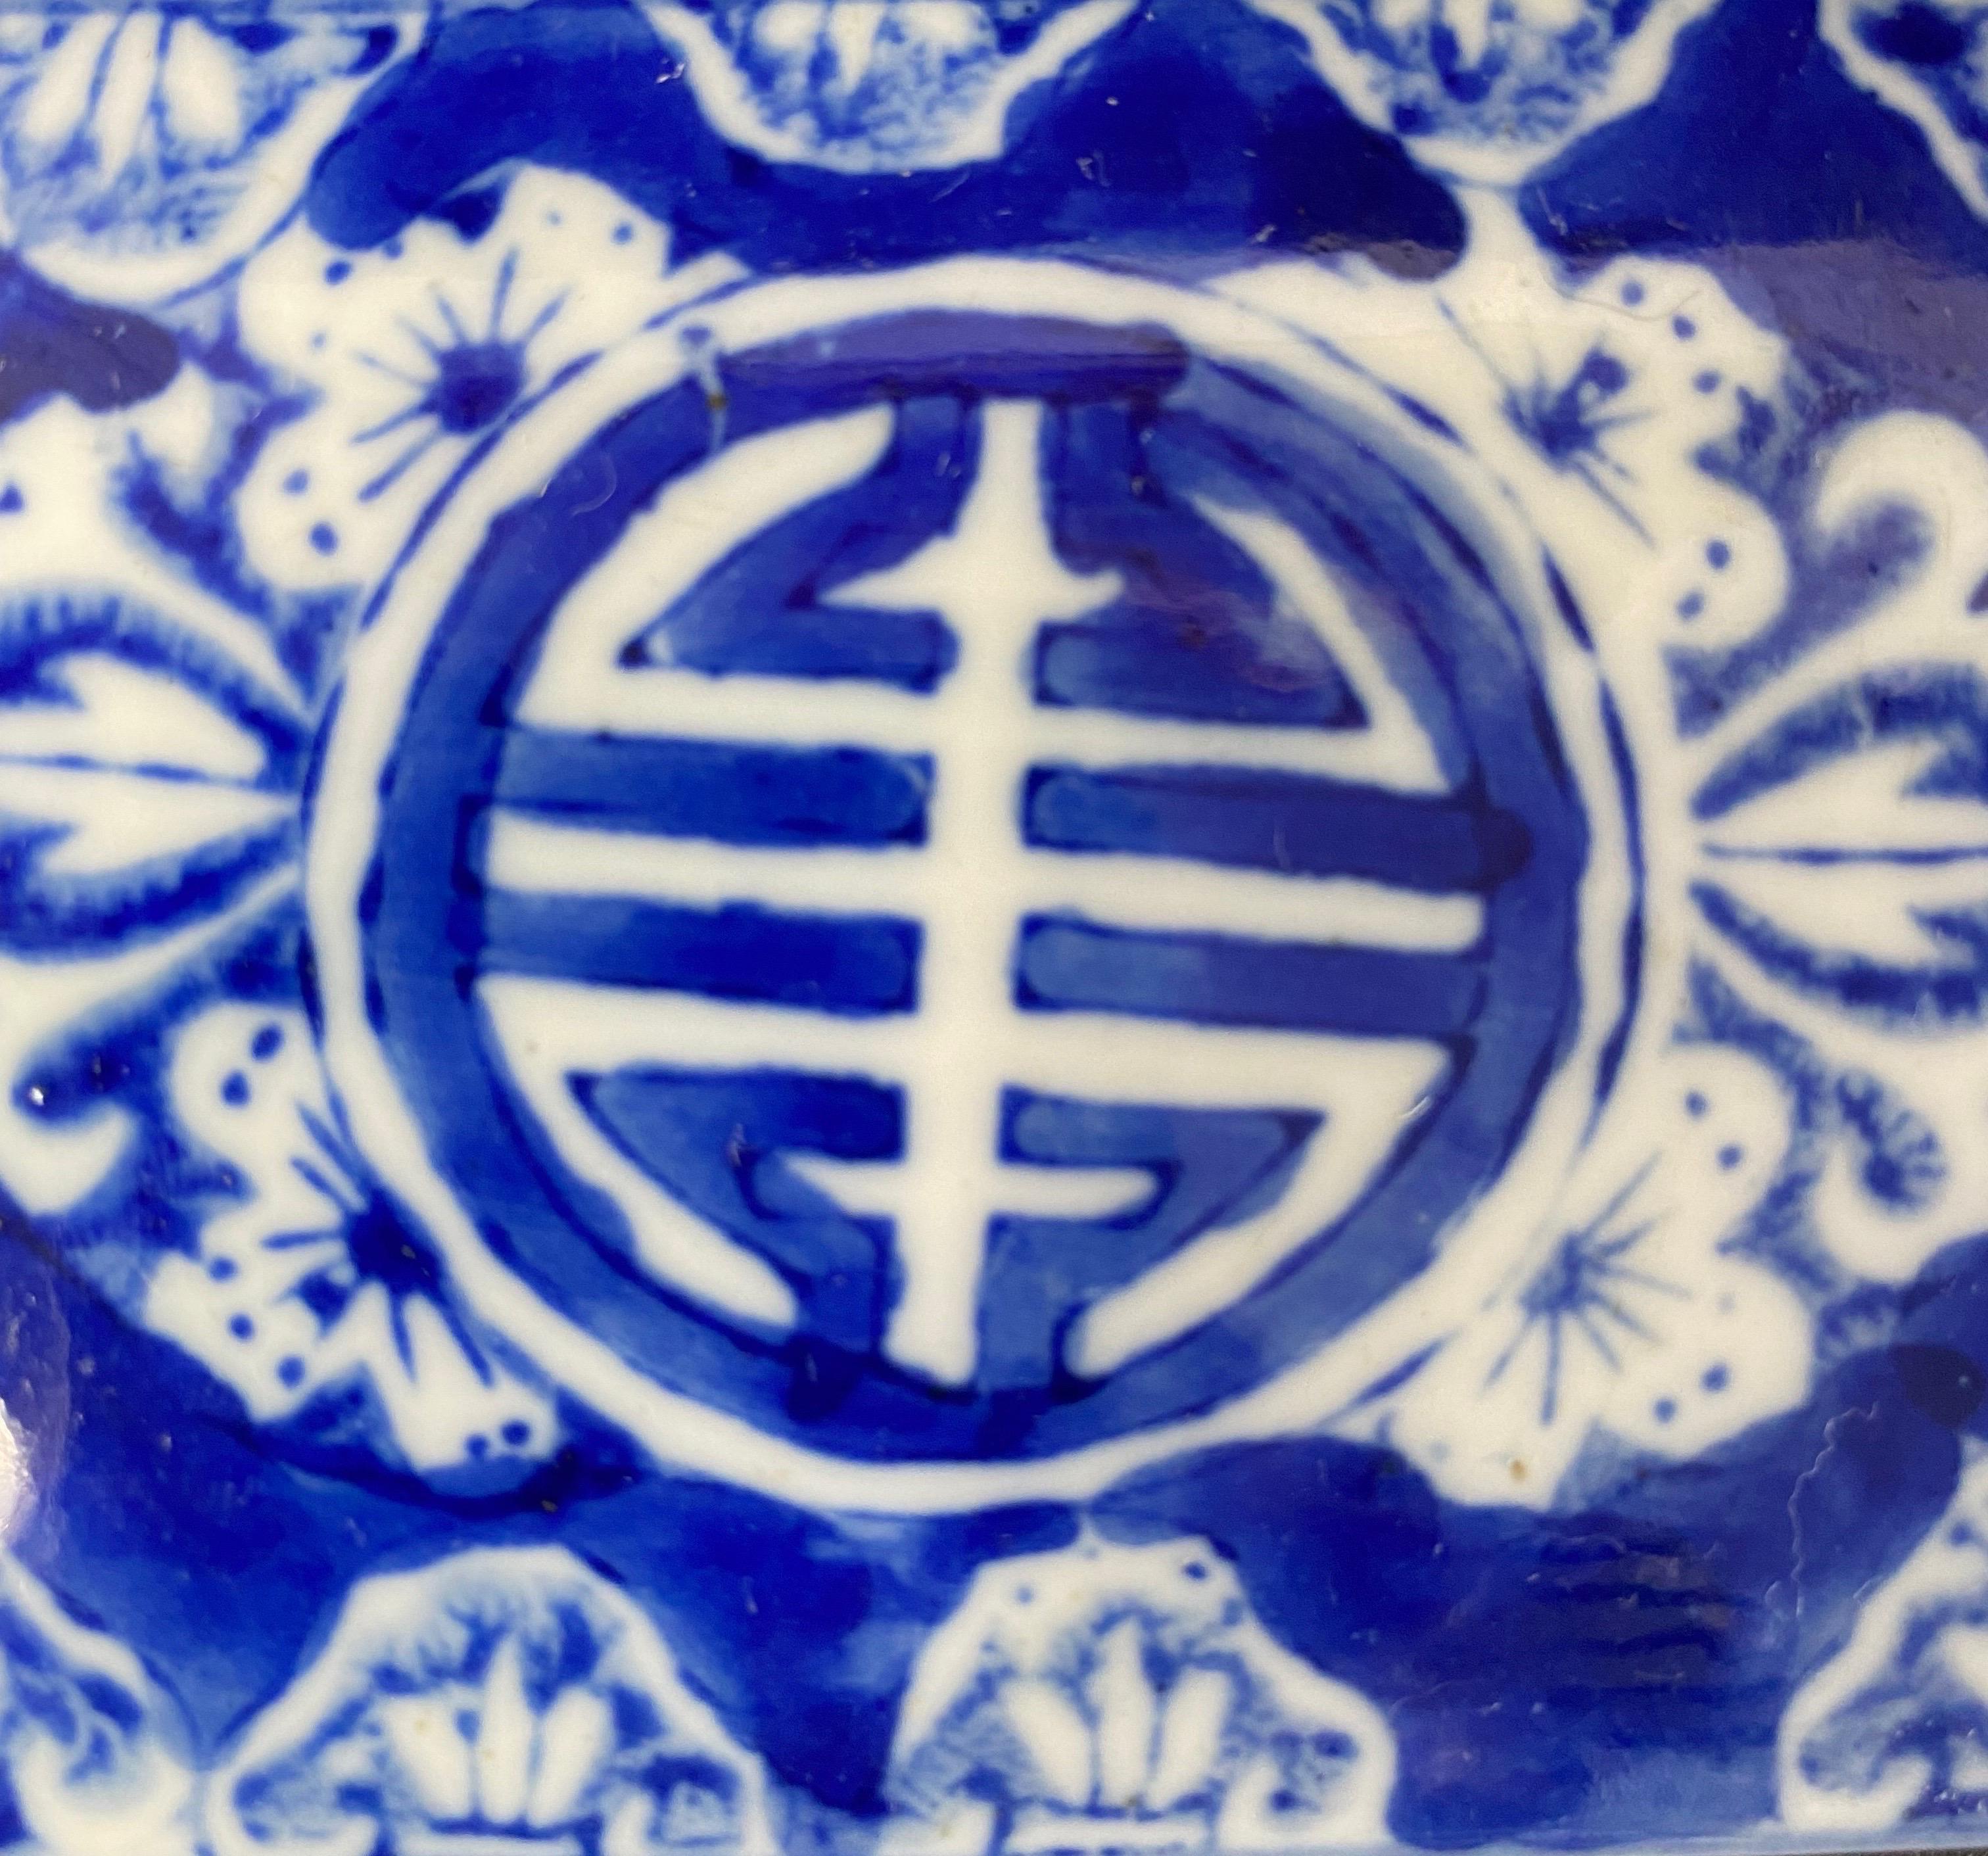 Blue and White Porcelain Ink Writing Jewerly Box - China 1900 Asian art XXth For Sale 4